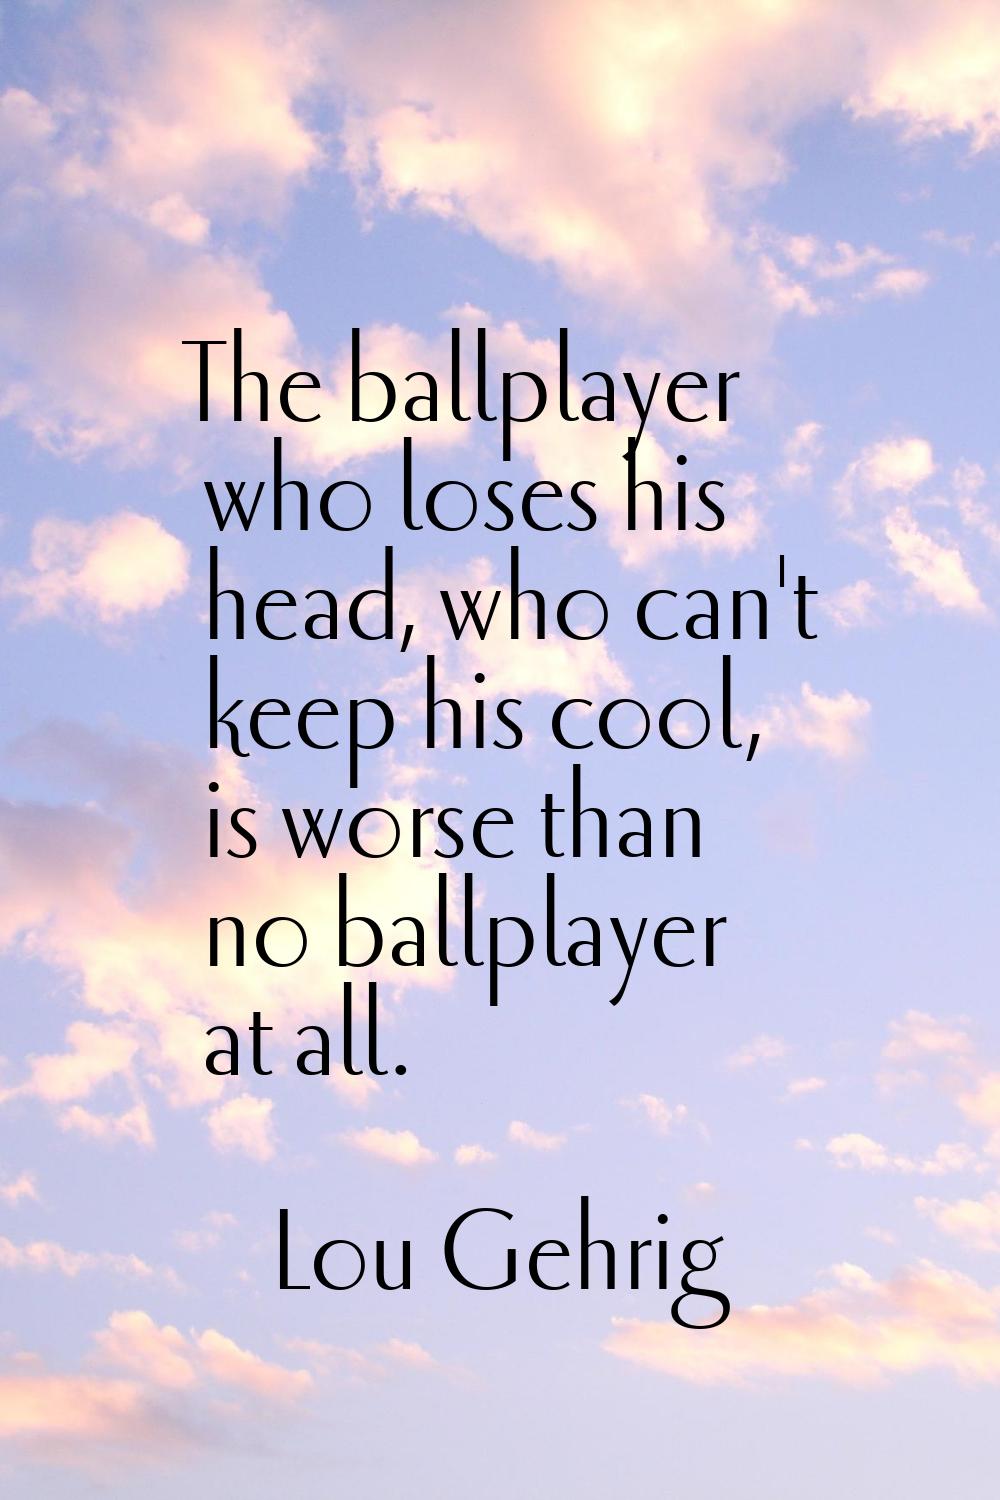 The ballplayer who loses his head, who can't keep his cool, is worse than no ballplayer at all.